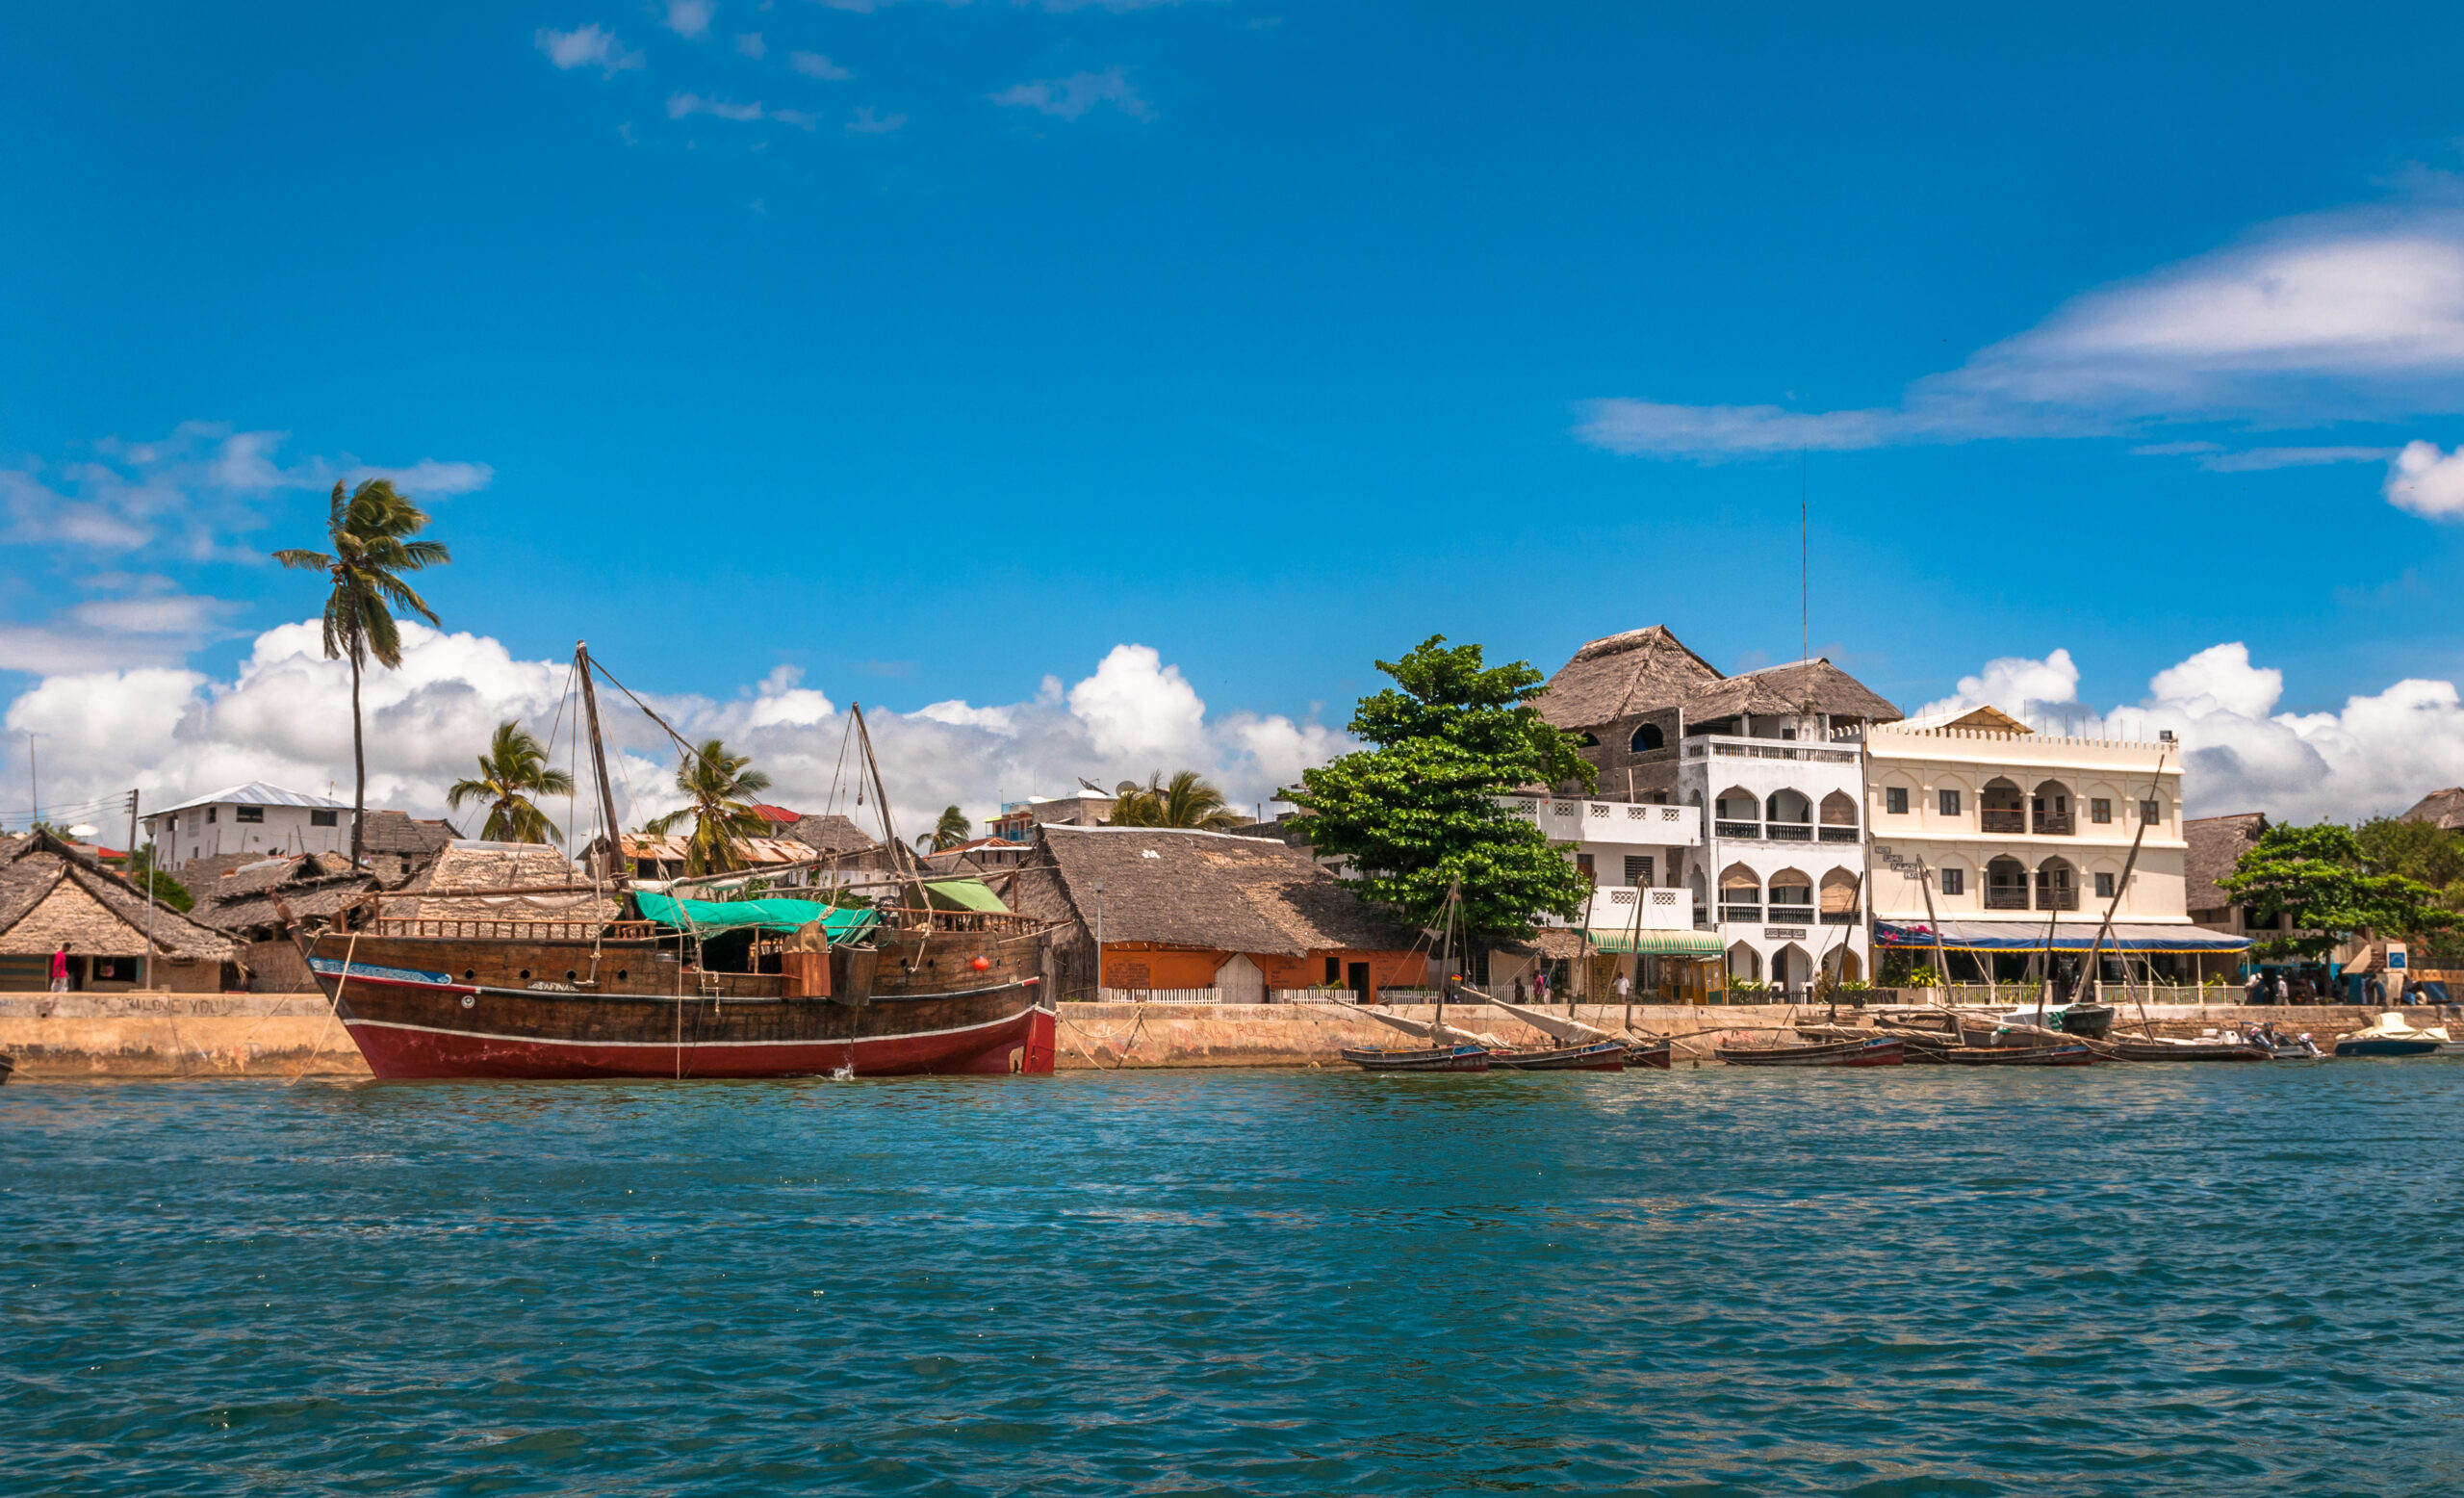 Discover extraordinary scenes like this waterfront in Lamu, Kenya when you take a tailor-made holiday with Alfred&